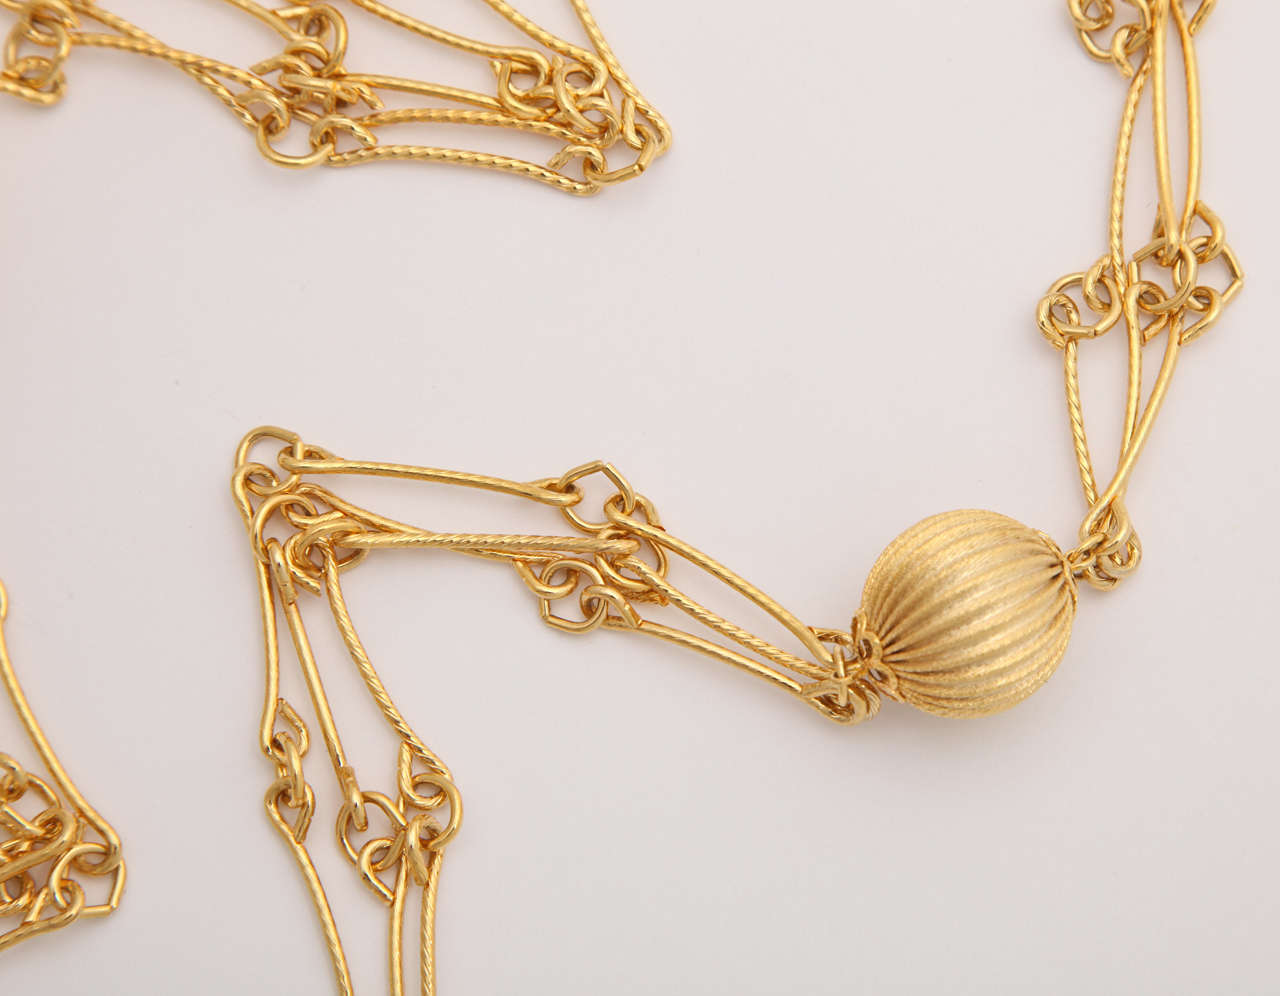 gold costume jewelry necklaces